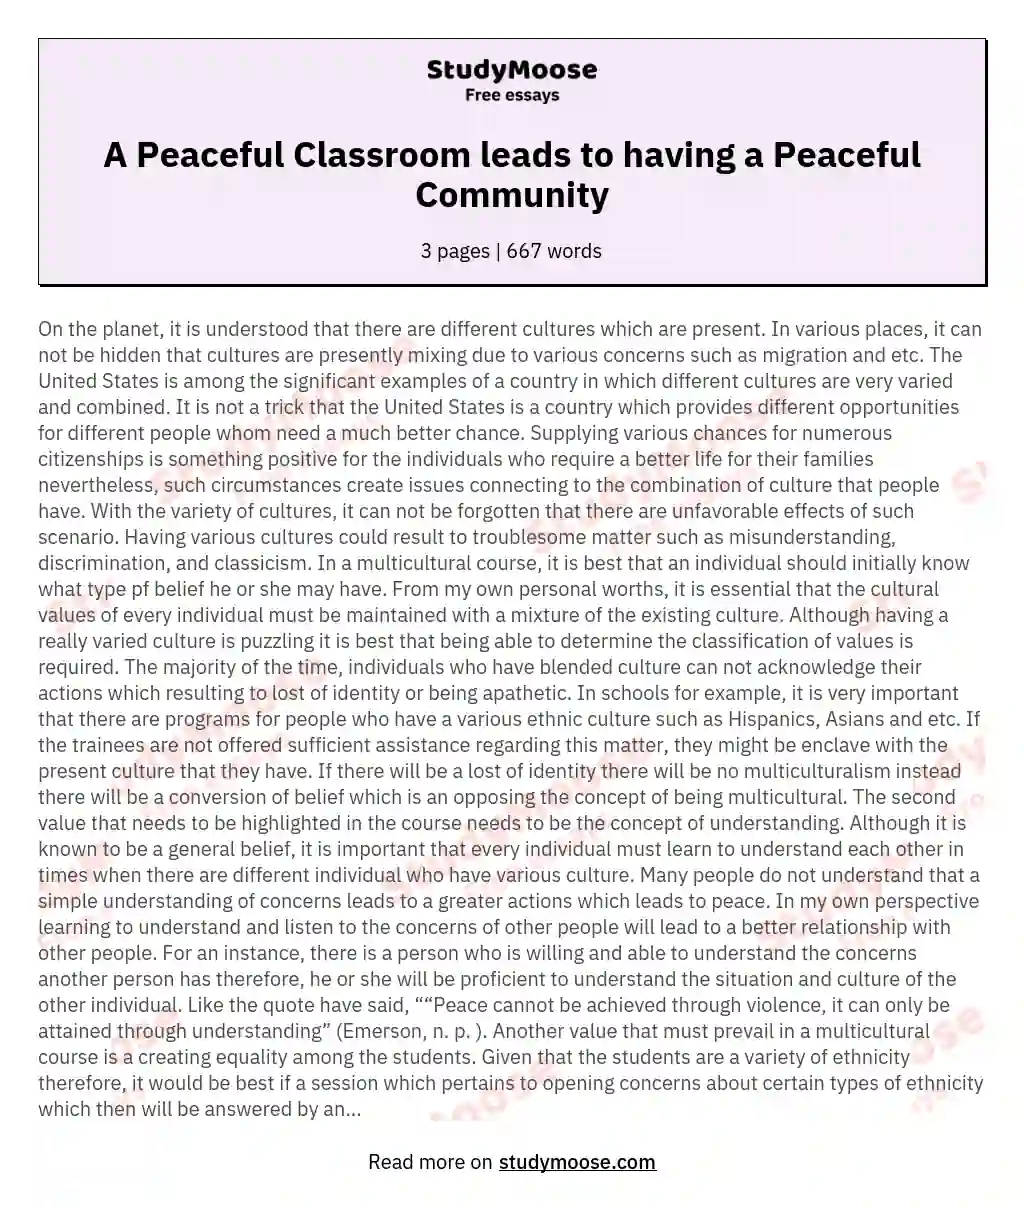 A Peaceful Classroom leads to having a Peaceful Community essay